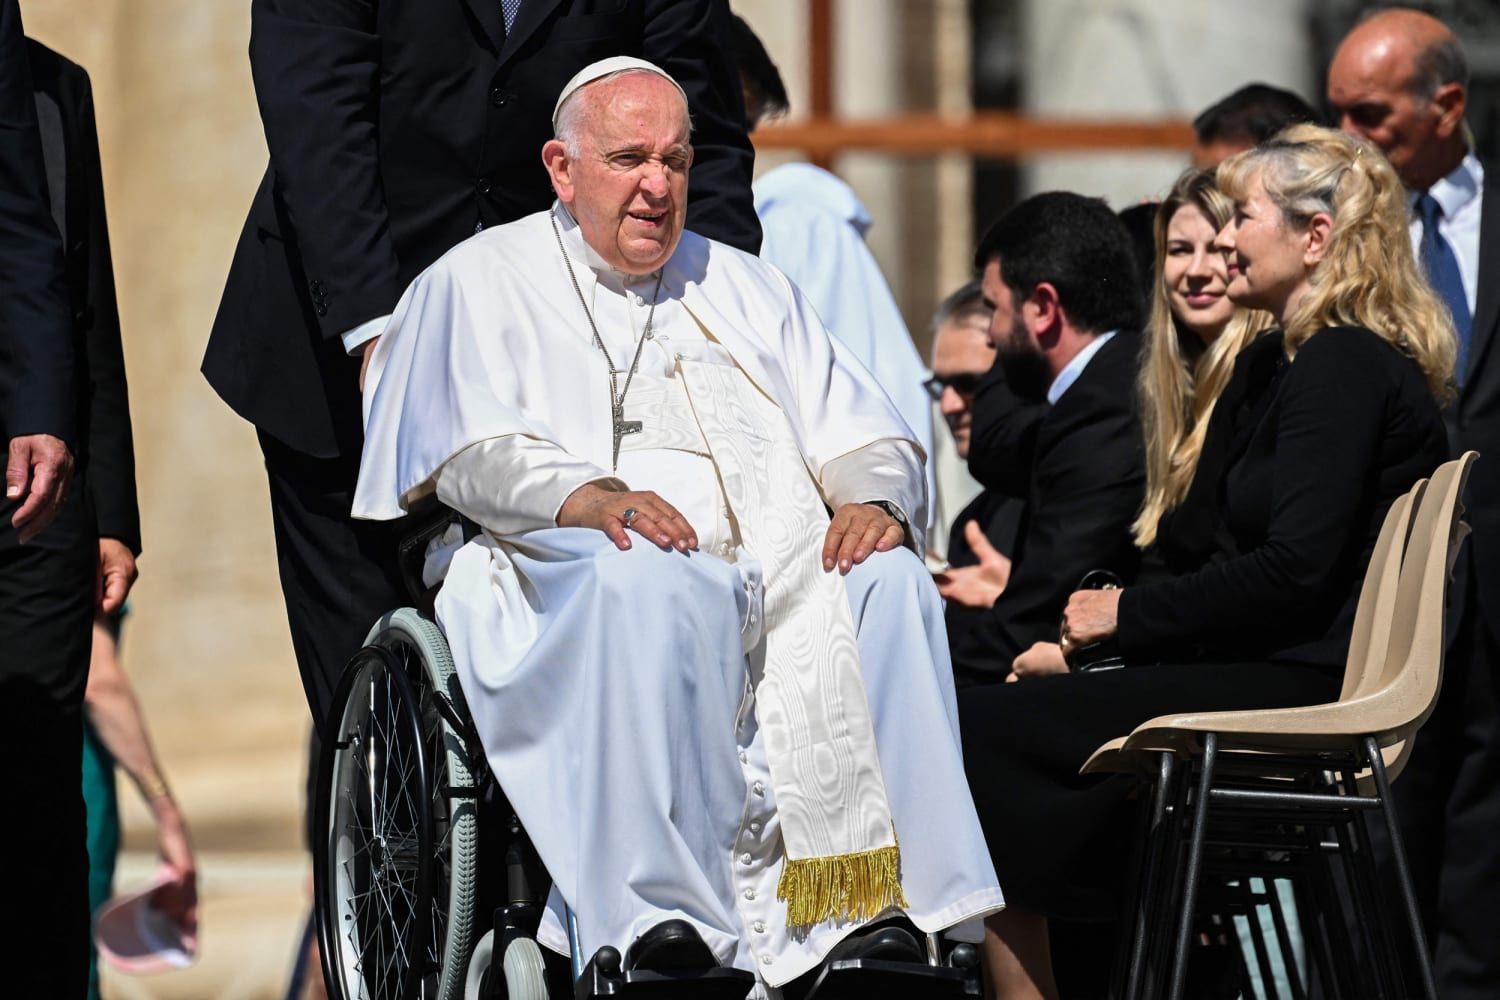 Pope Francis emerges from 3-hour abdominal operation without complications